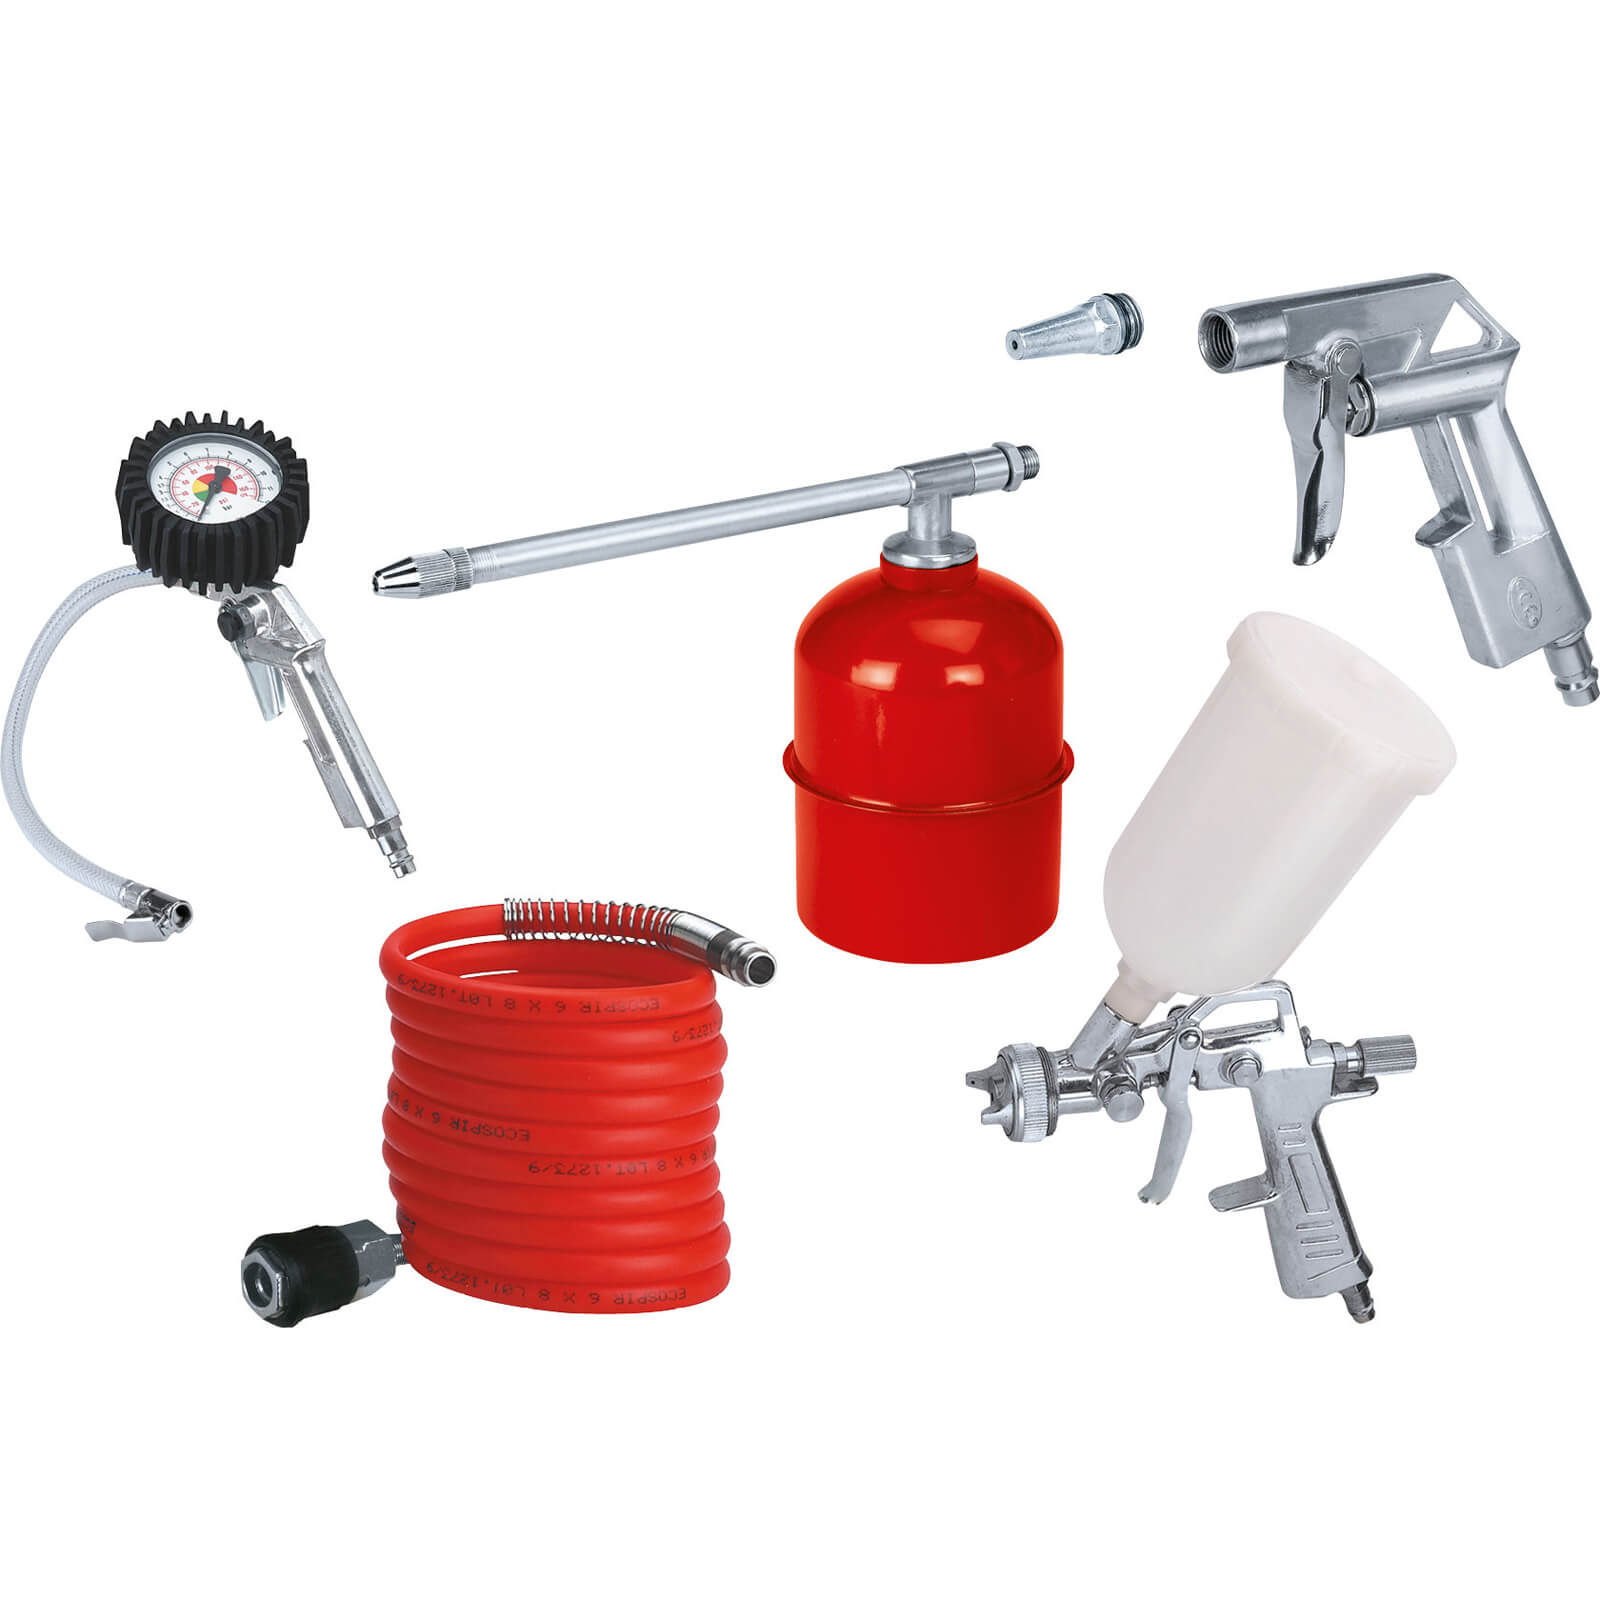 Image of Einhell 5 Piece Air Tool Accessory Kit